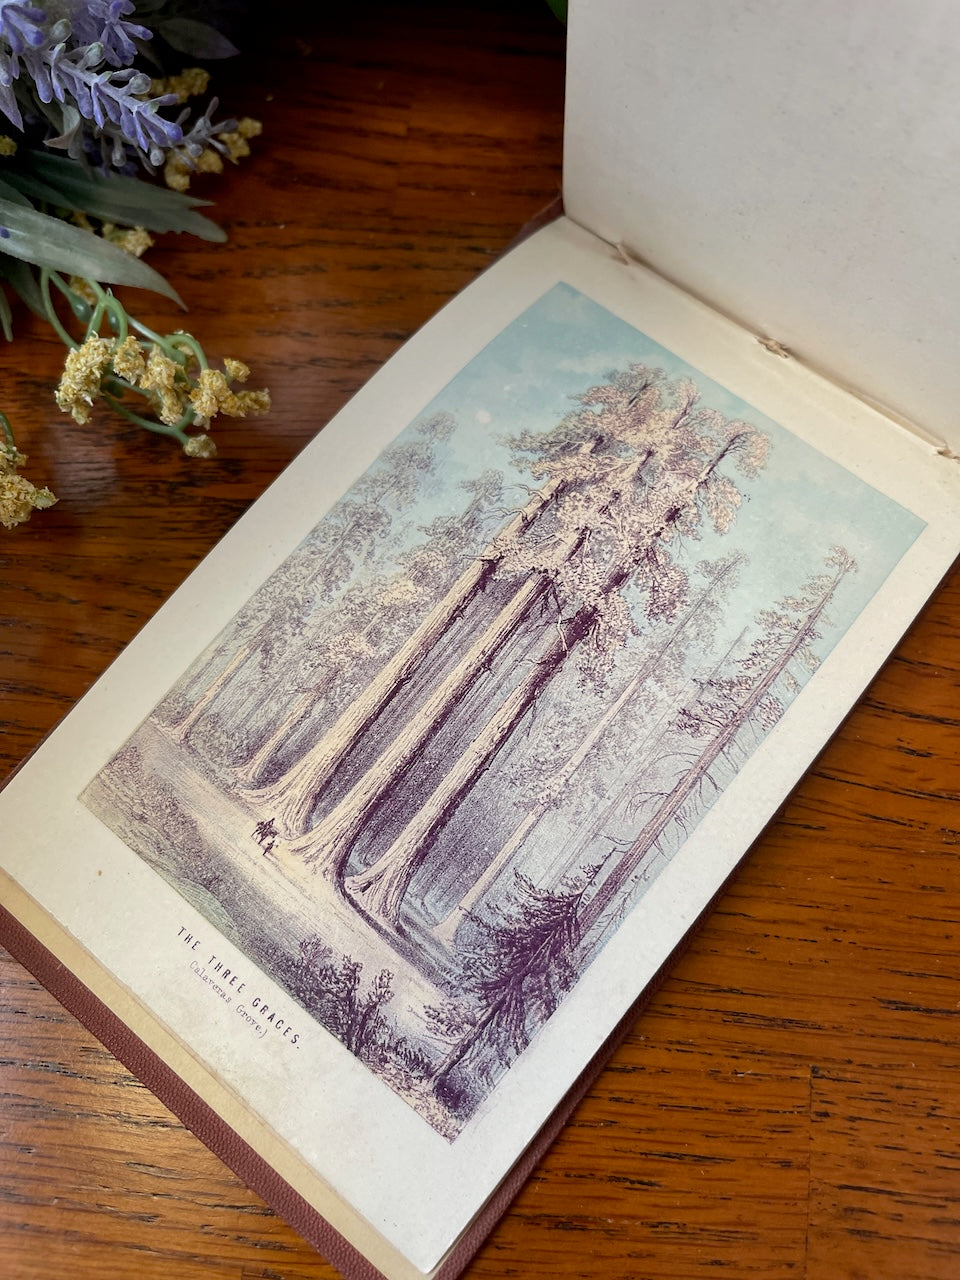 The Yosemite Valley / Pictorial Guide Book / n.d. 1870